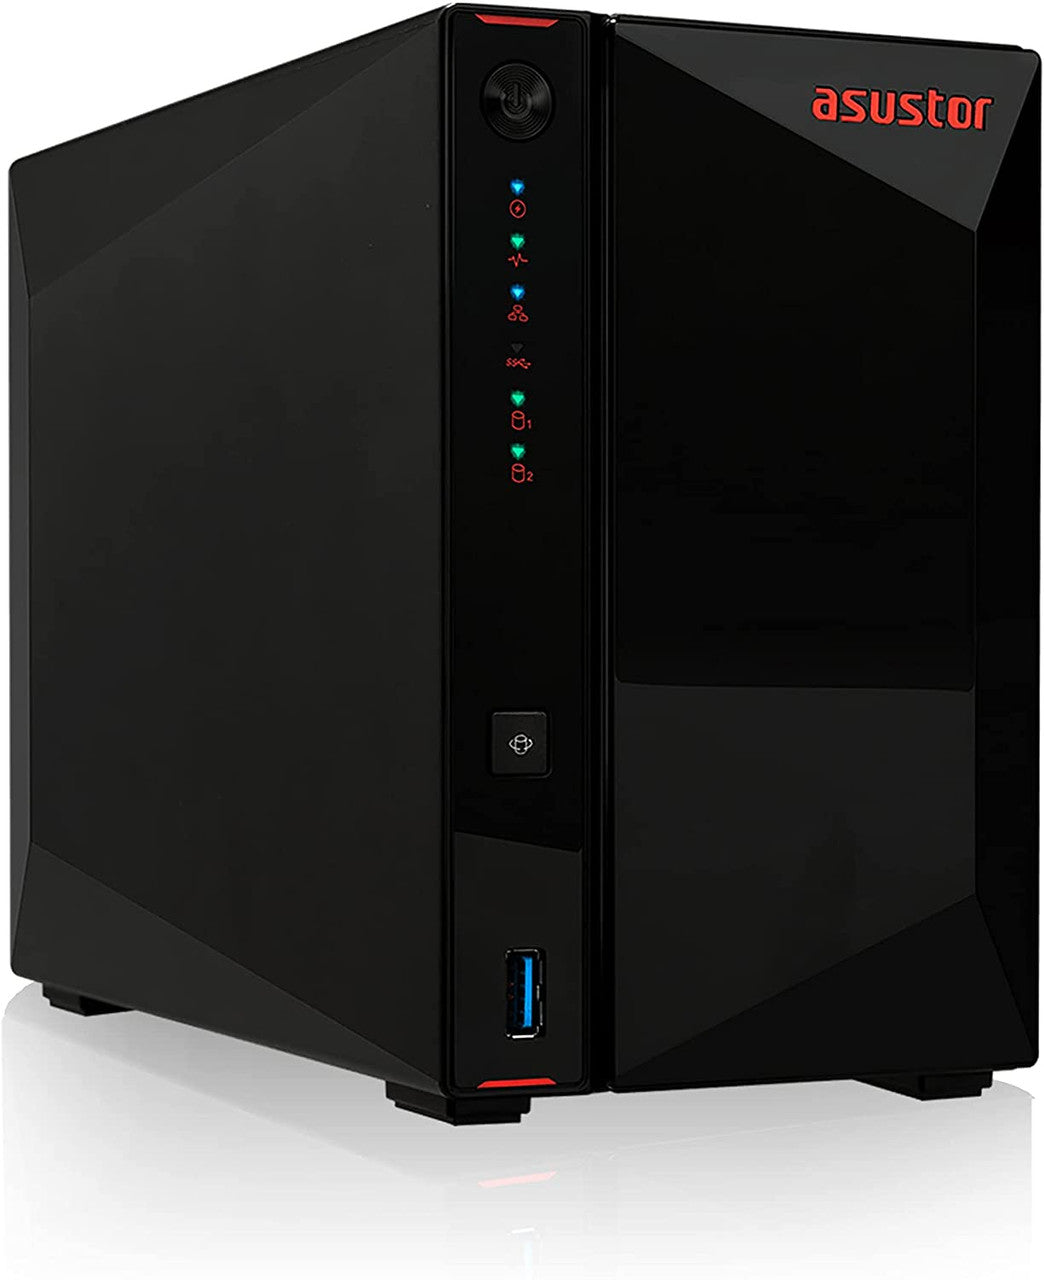 Asustor AS5202T 2-Bay Nimbustor 2 NAS with 8GB RAM and 16TB (2 x 8TB) Seagate Ironwolf PRO Drives Fully Assembled and Tested